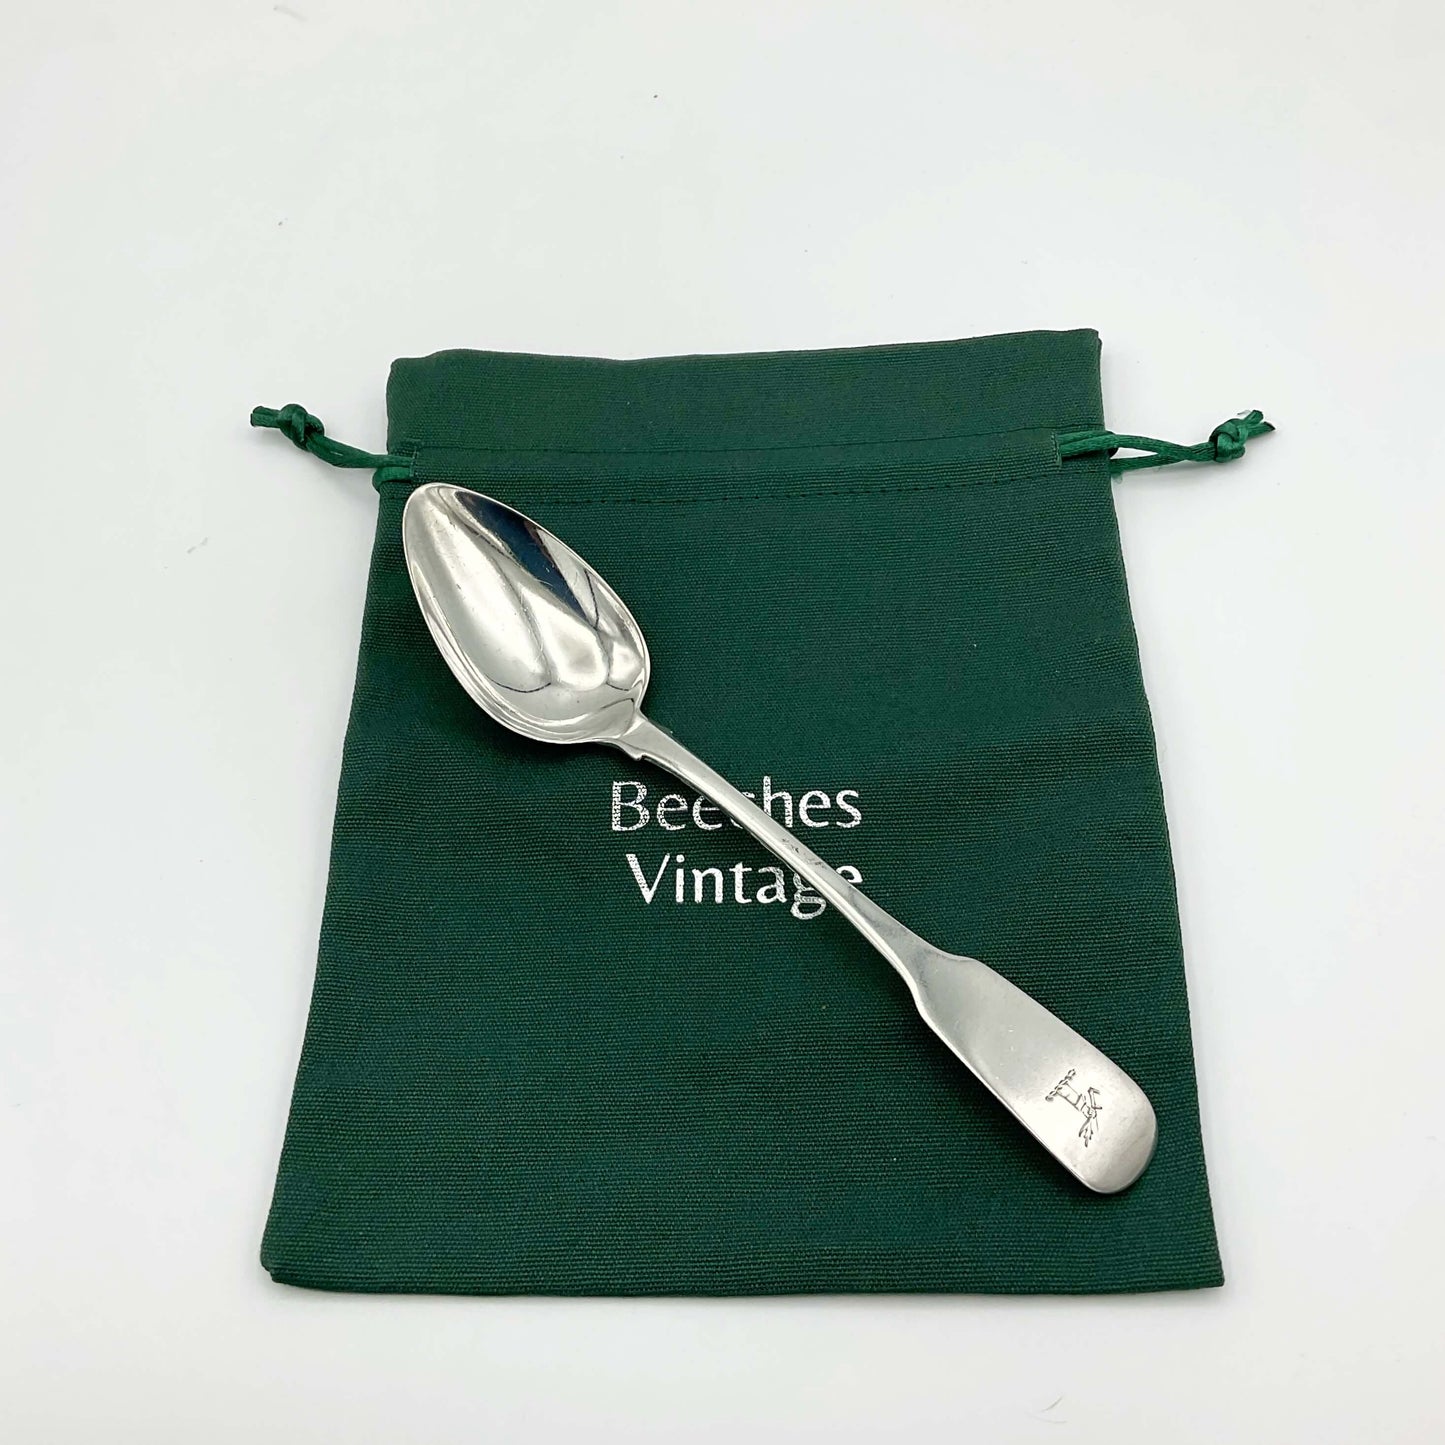 Silver dessert spoon on a green cotton gift bag